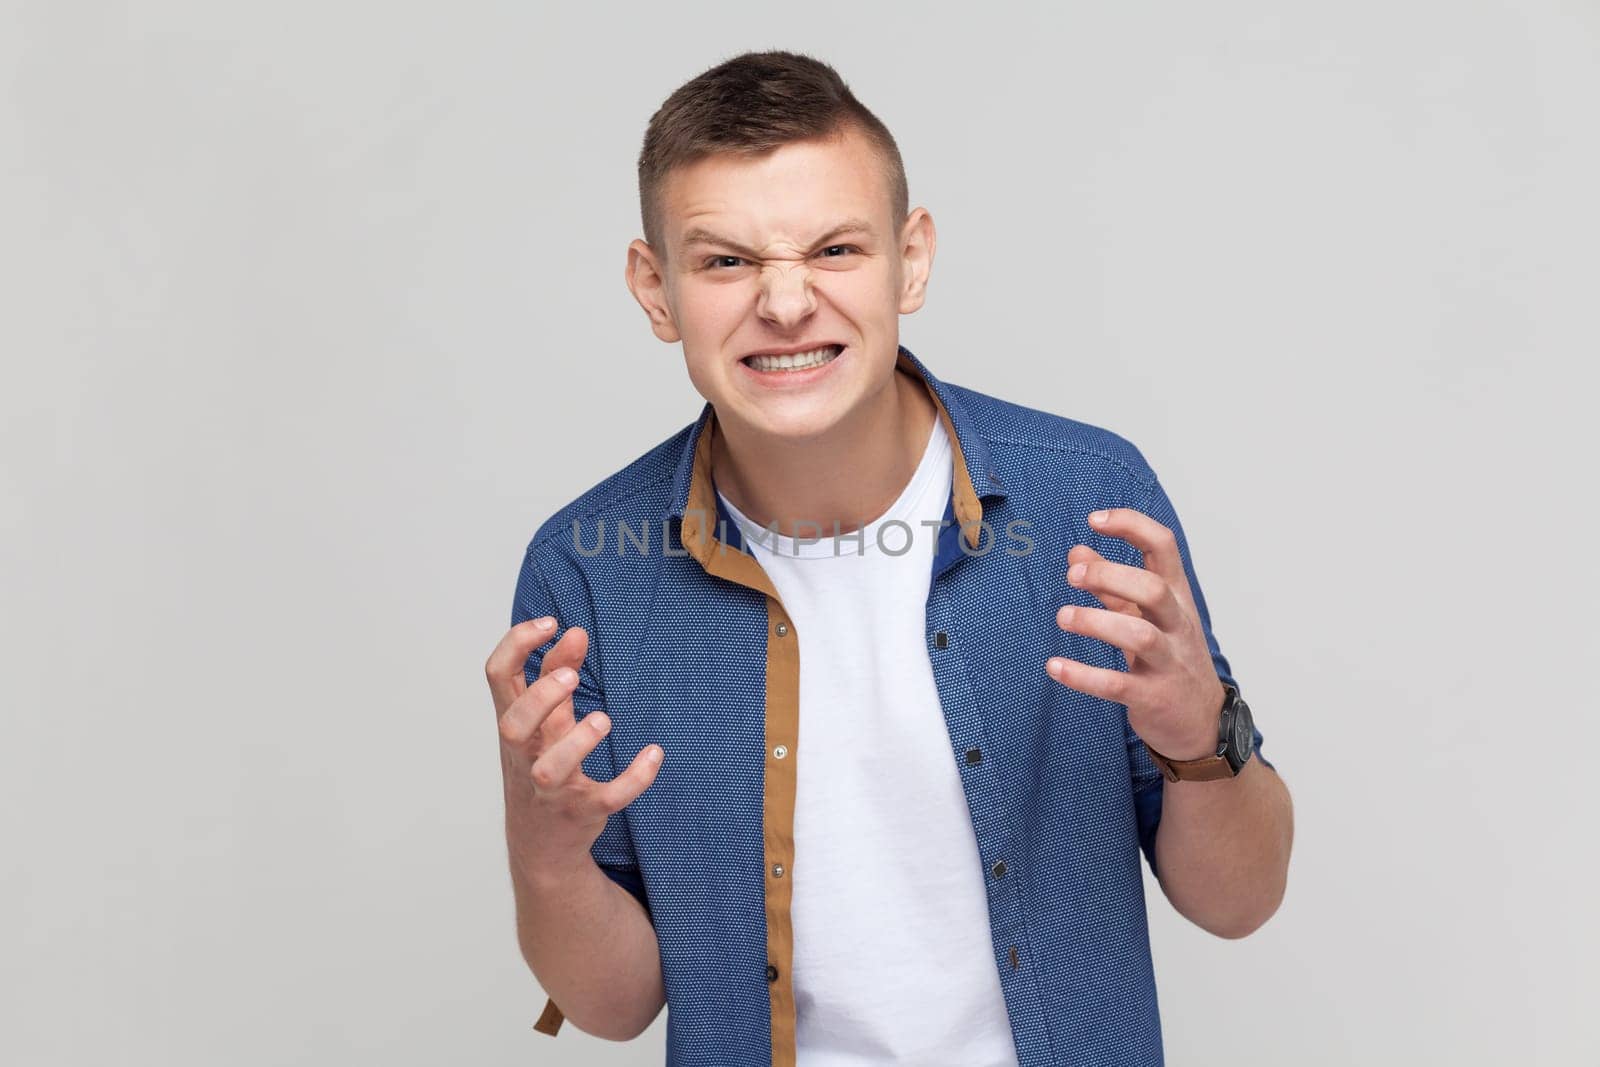 Angry furious teenager boy wearing blue shirt standing and screaming with anger, expressing aggression, swearing with someone, having problems. Indoor studio shot isolated on gray background.